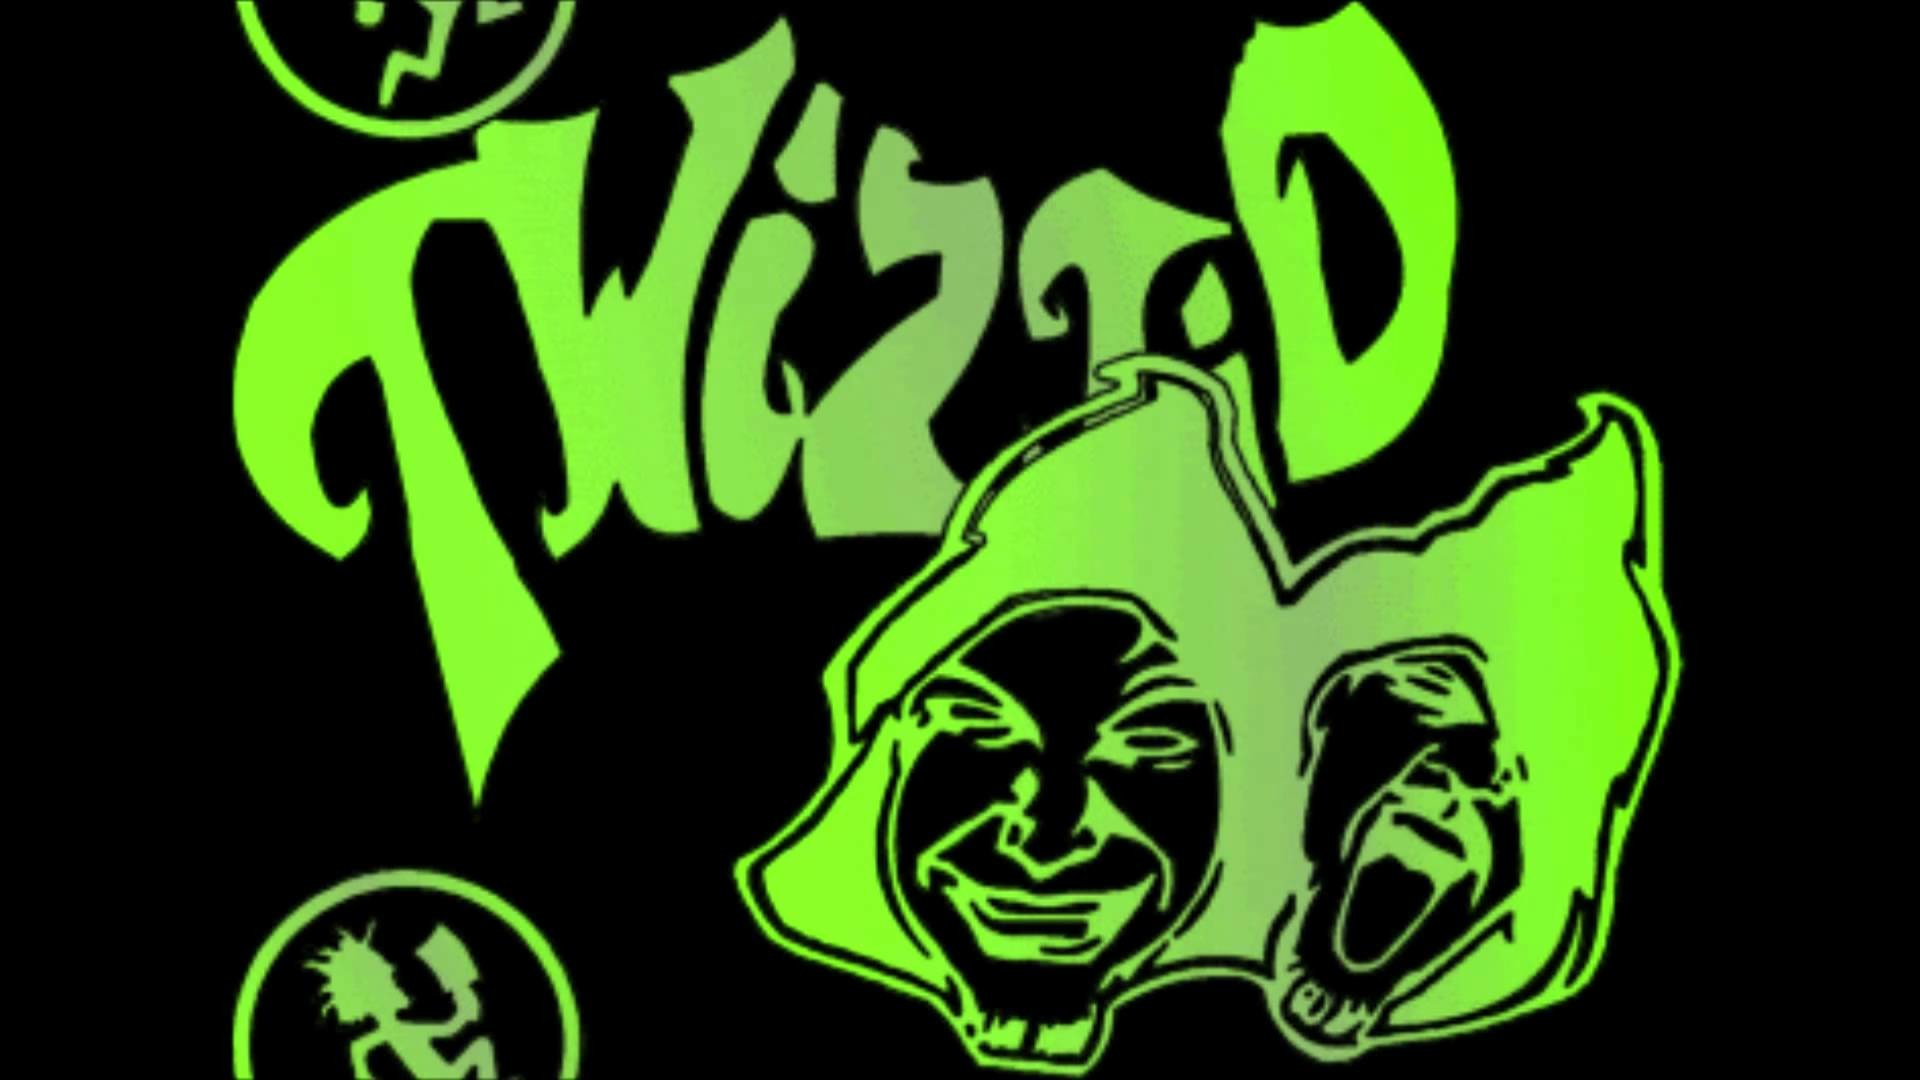 1920x1080 Twiztid Wallpapers HD. Twiztid : Get Off of Me - YouTube